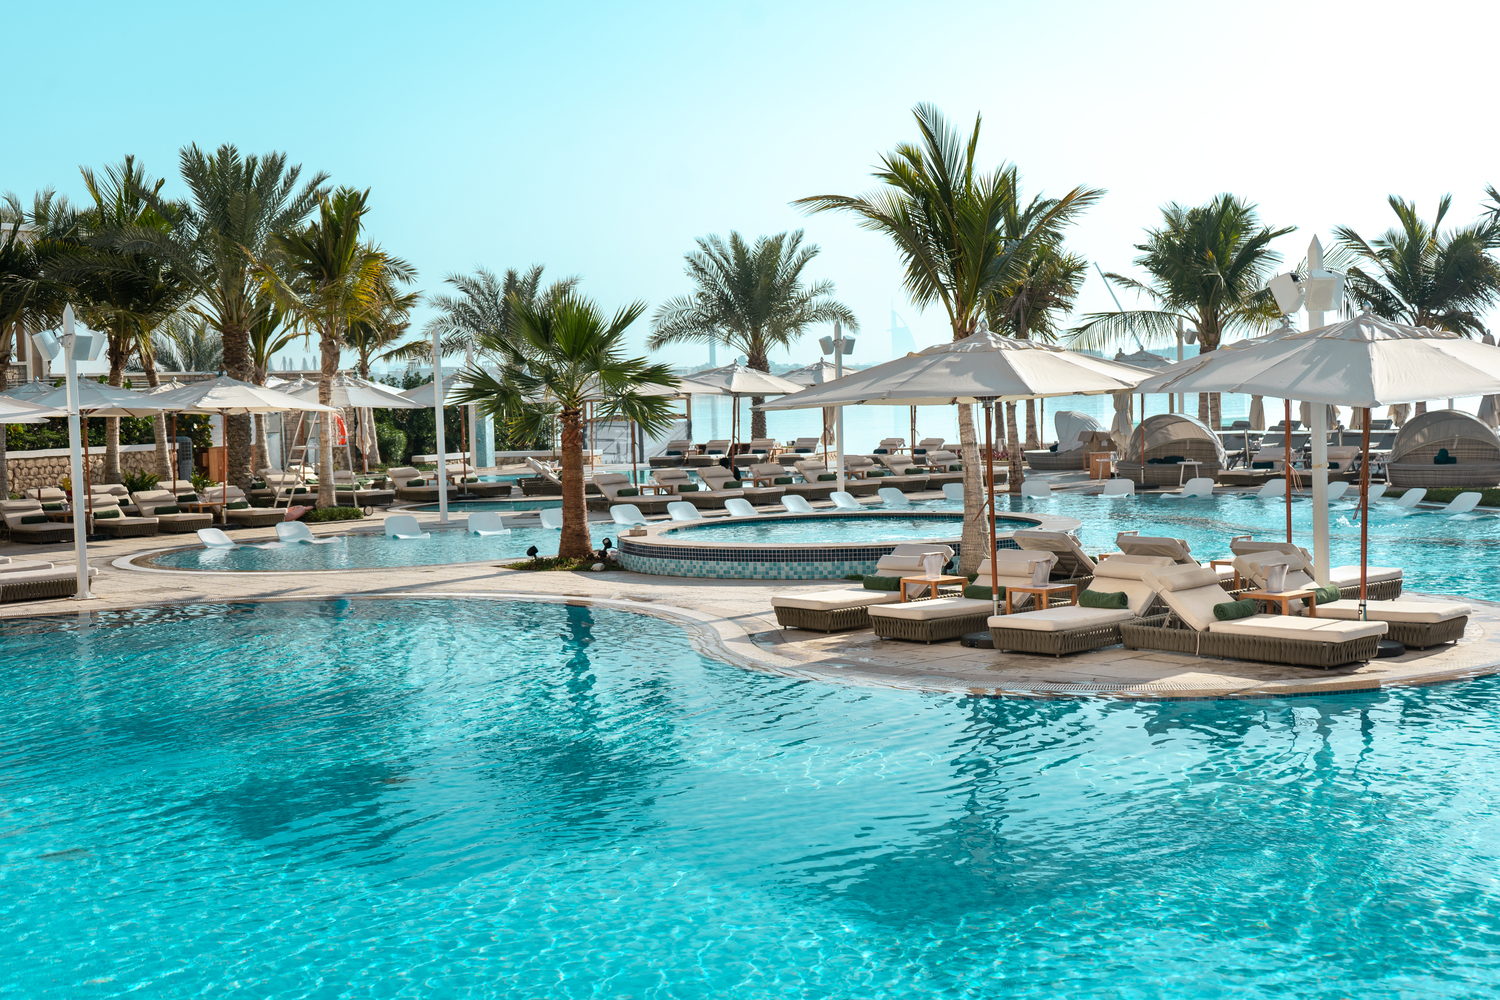 The First Group elevates the Dubai lifestyle experience with launch of exclusive beach club